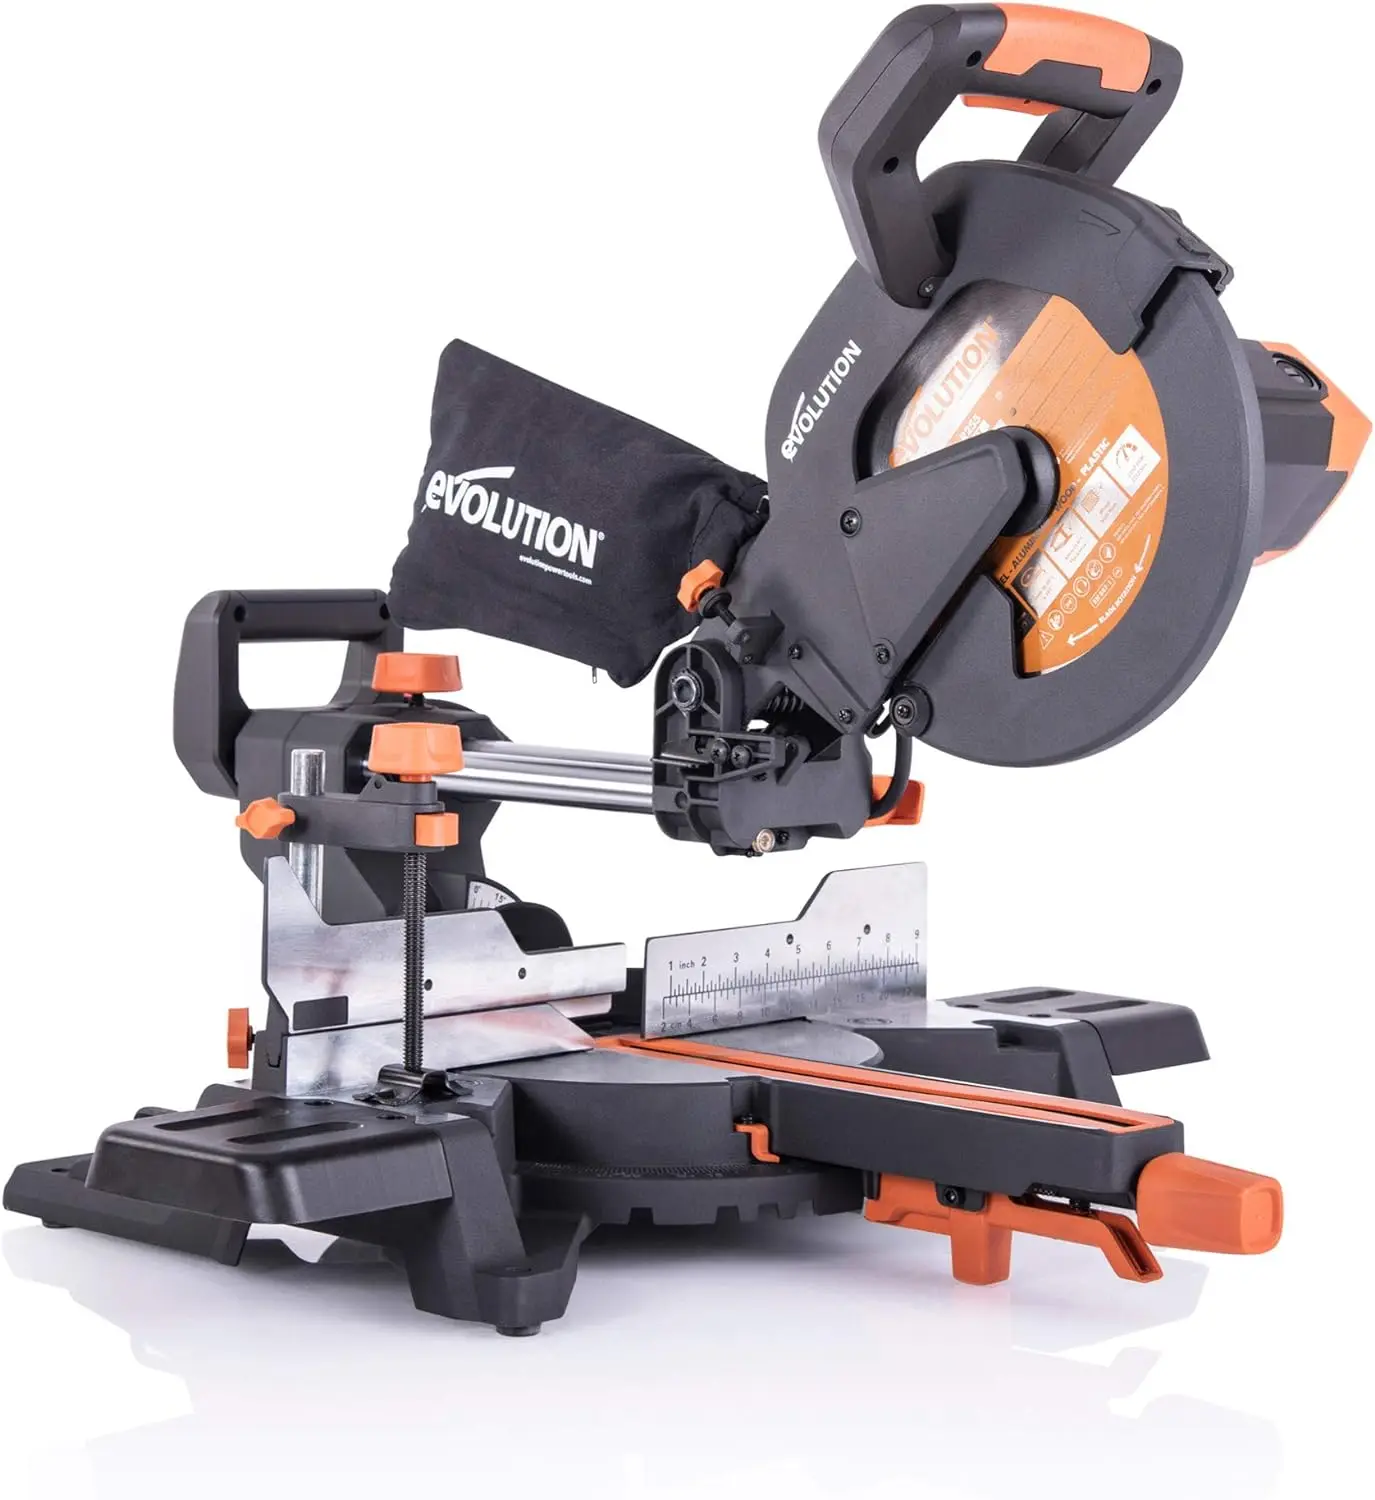 

Power Tools R255SMS+ PLUS 10-Inch Sliding Miter Saw Plus Multi-Material All-Purpose Cutting Cuts Metal, Plastic, Wood, and More